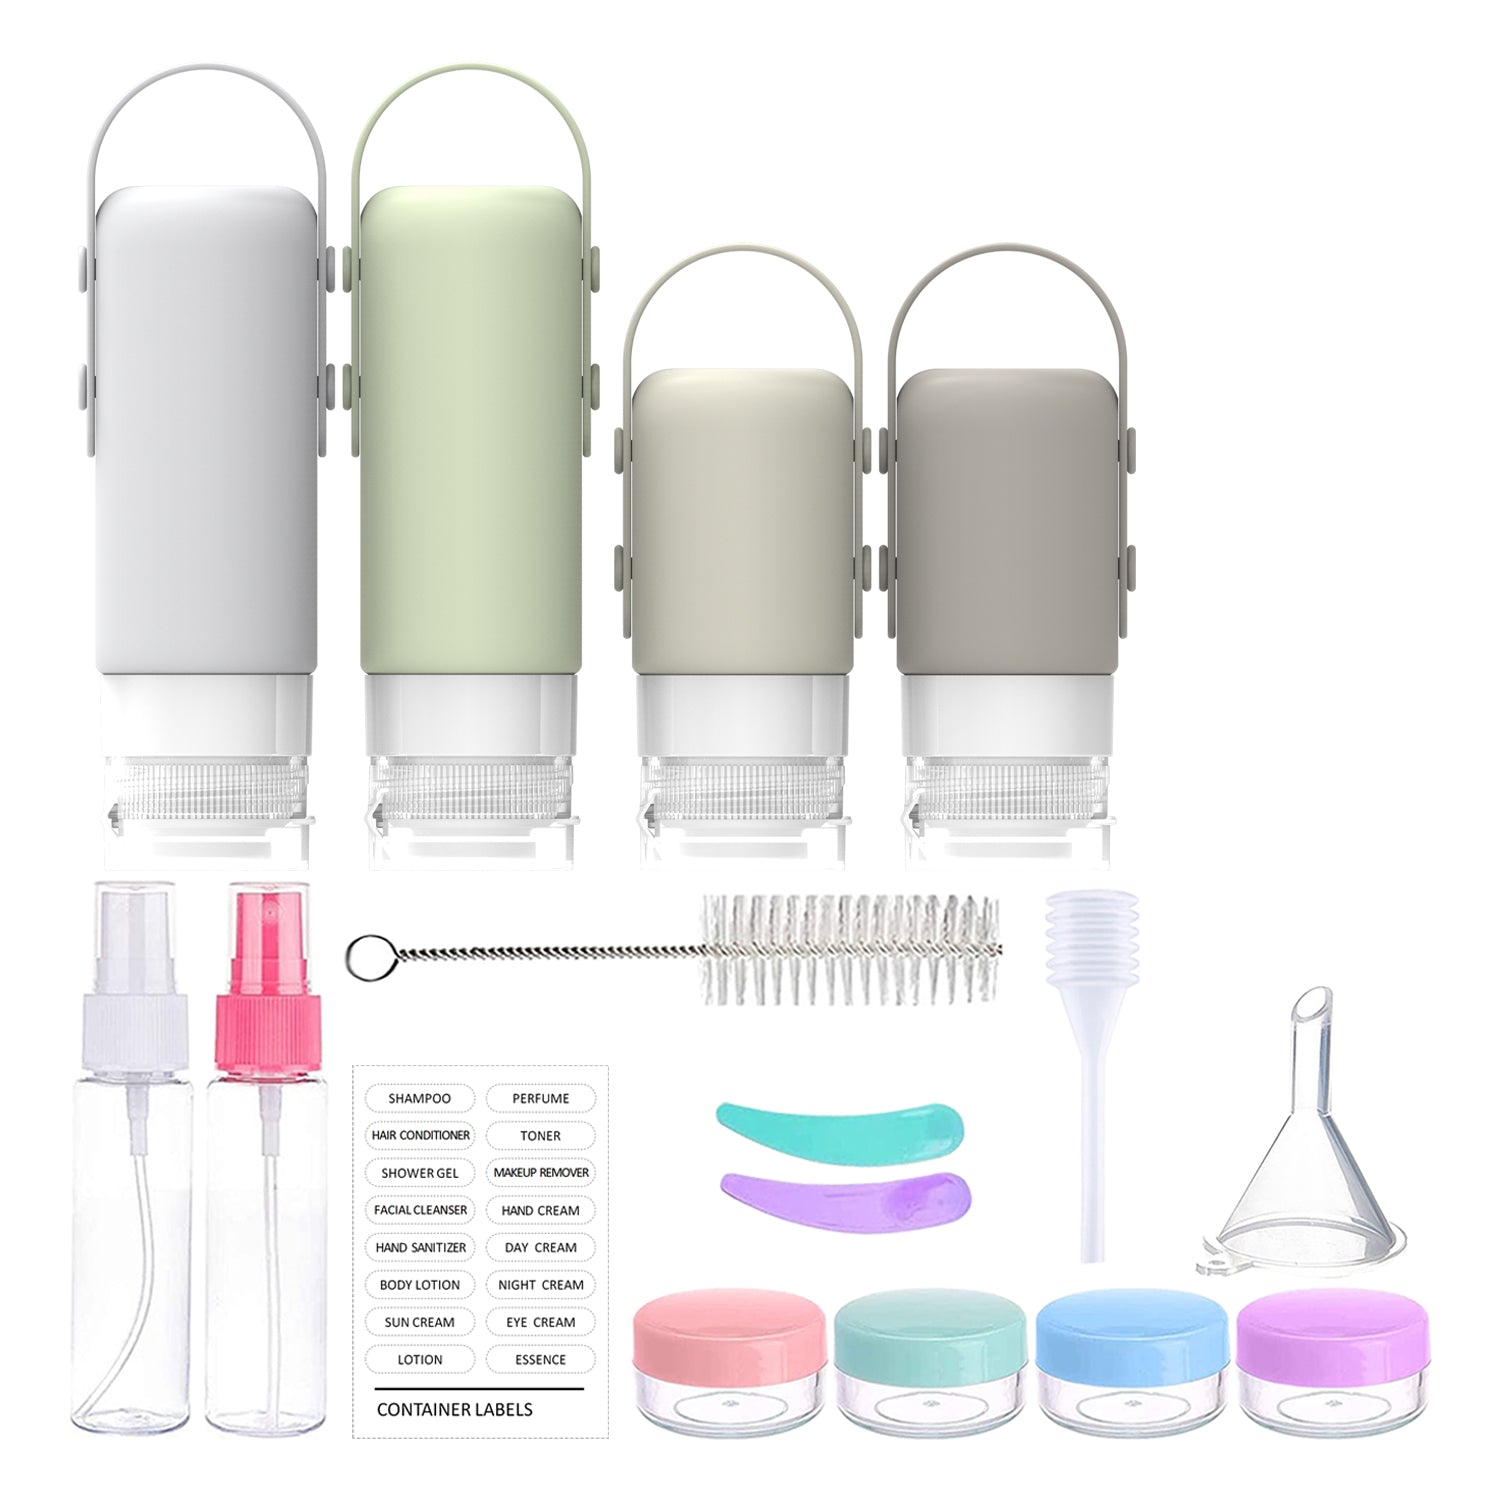 Portable Silicone Travel Bottles Set with Keychain - Refillable, Leak-proof Containers for Hand Sanitizer, Toiletries, Shampoo